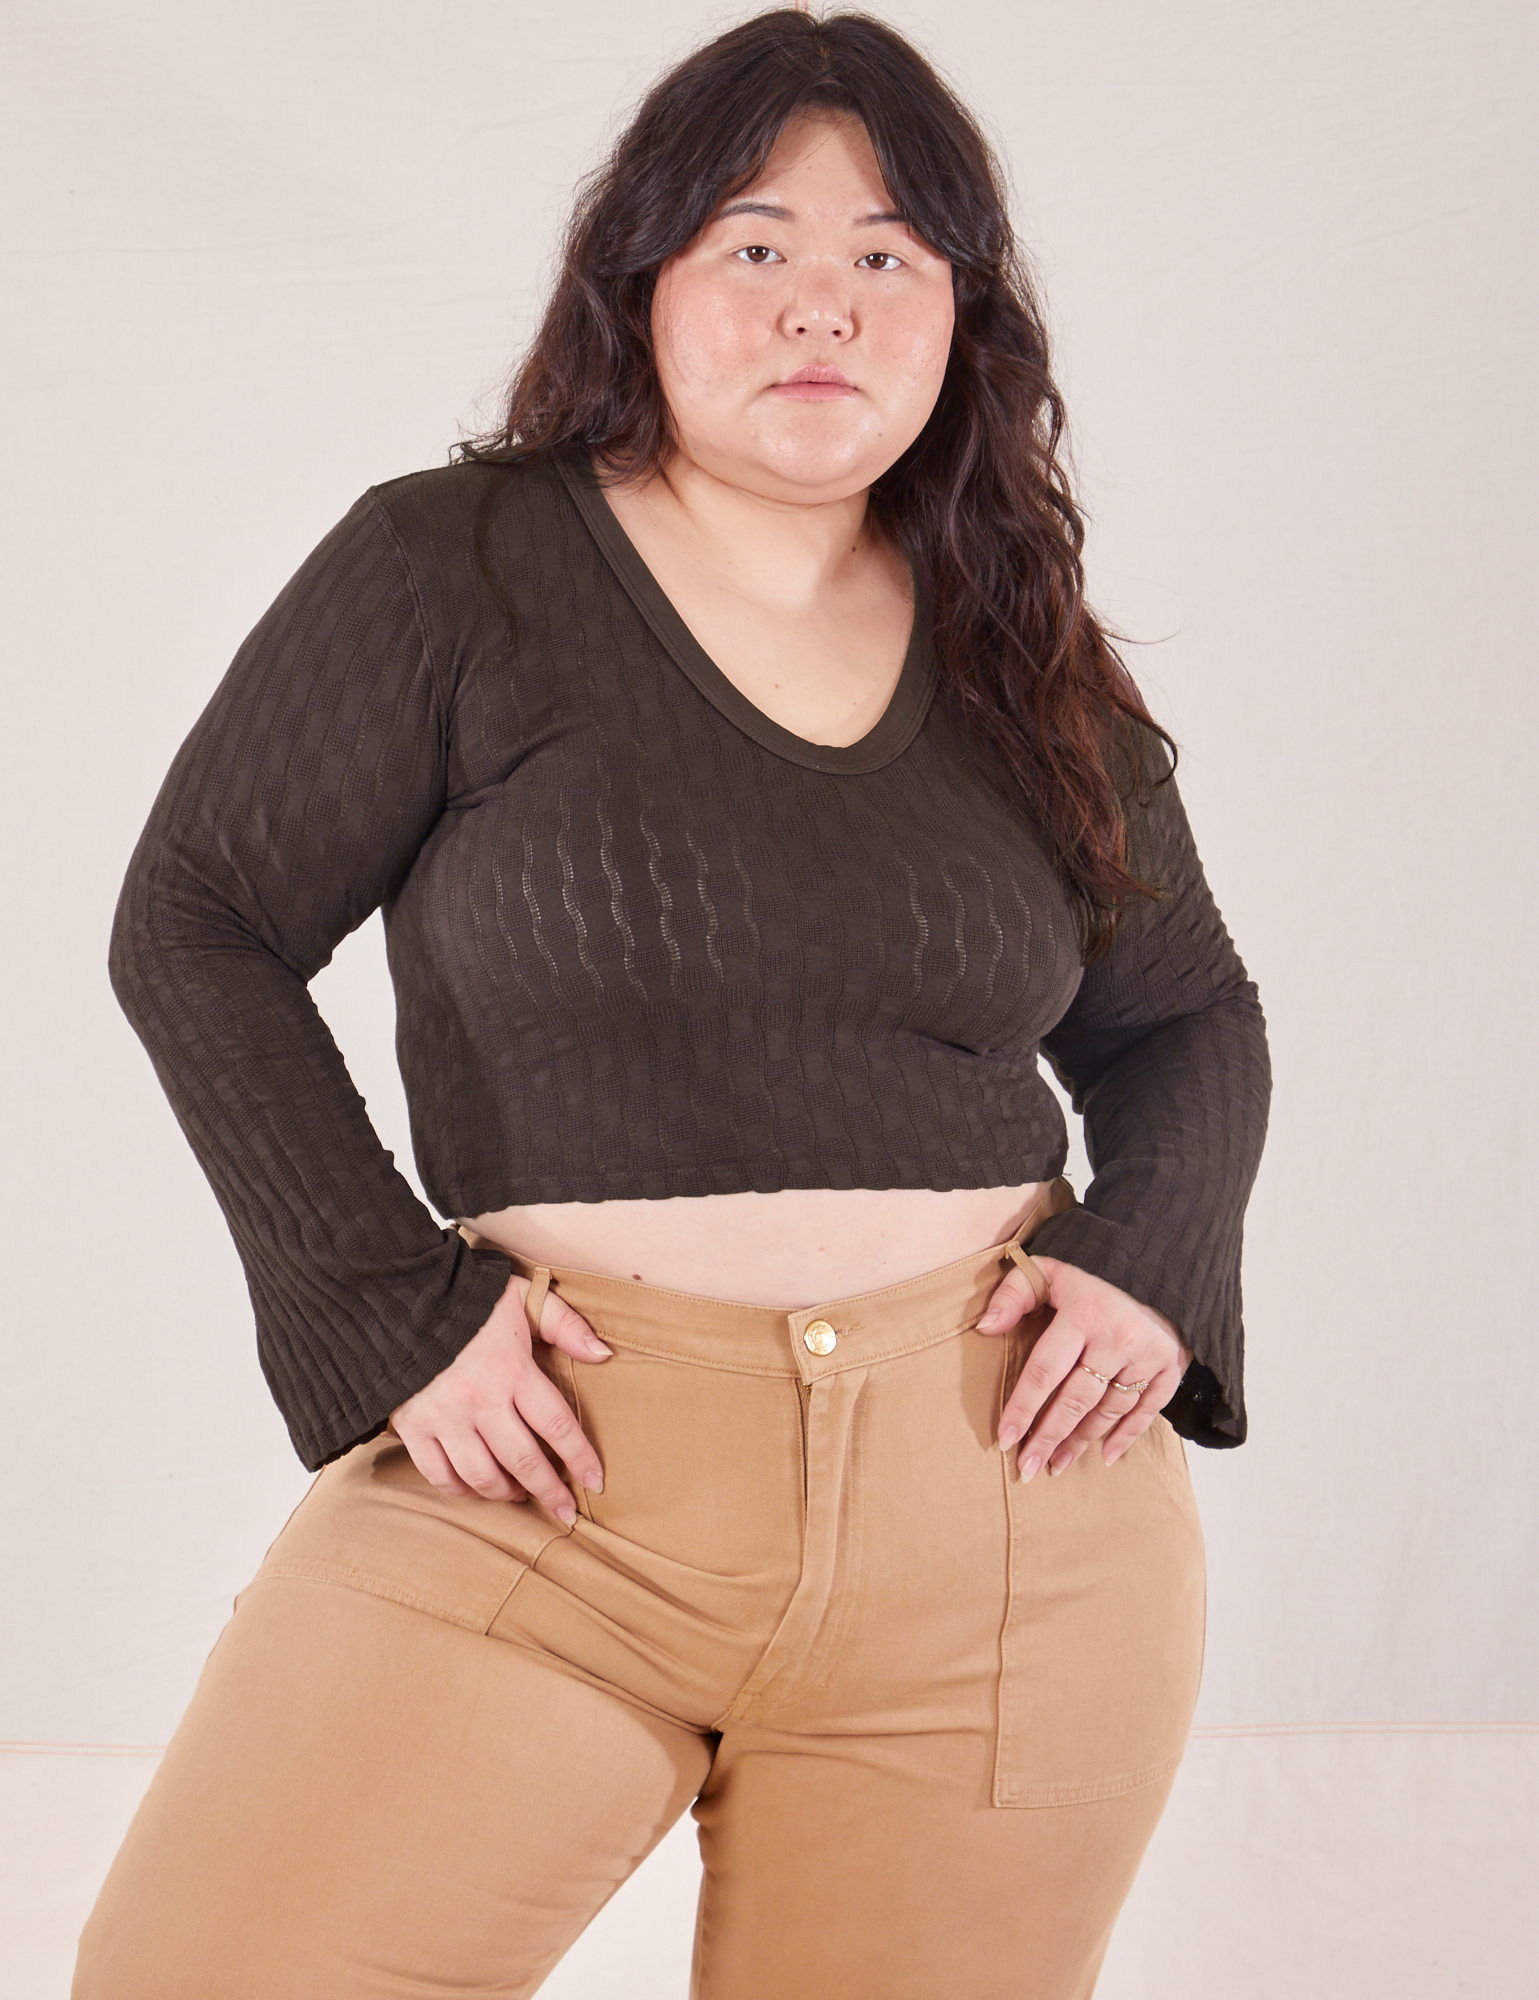 Ashley is wearing L Bell Sleeve Top in Espresso Brown